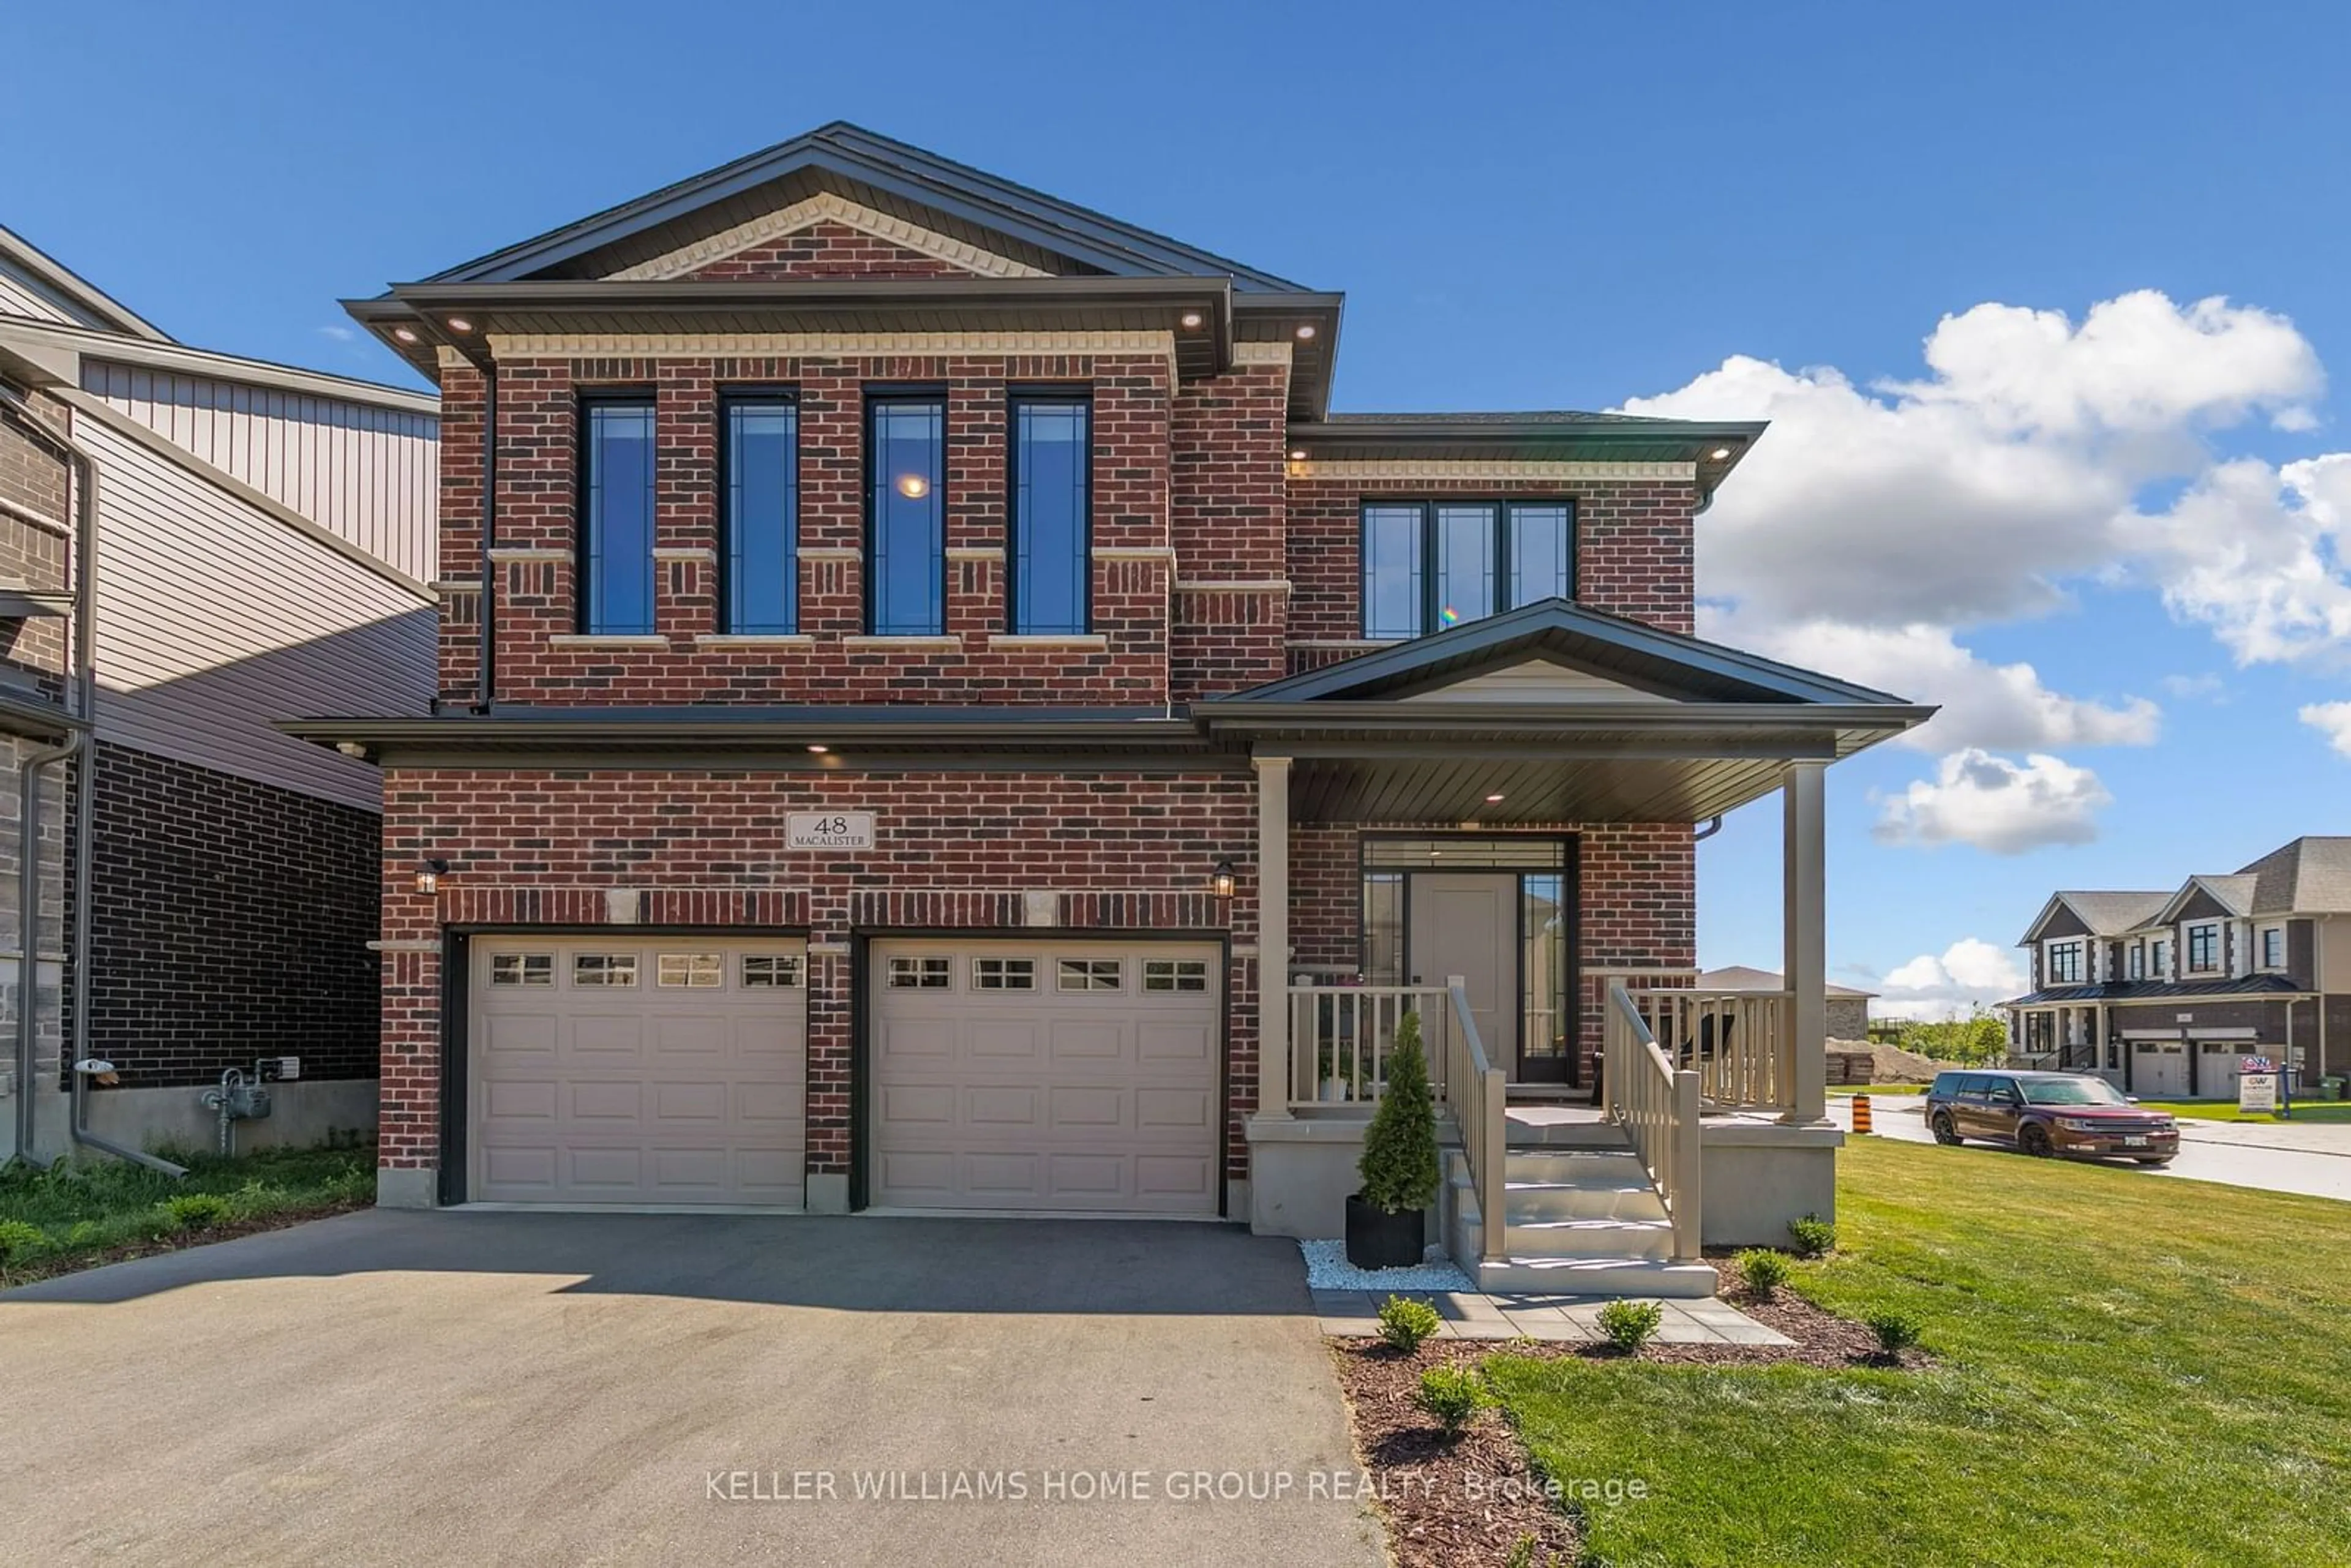 Home with brick exterior material for 48 Macalister Blvd, Guelph Ontario N1G 0G6